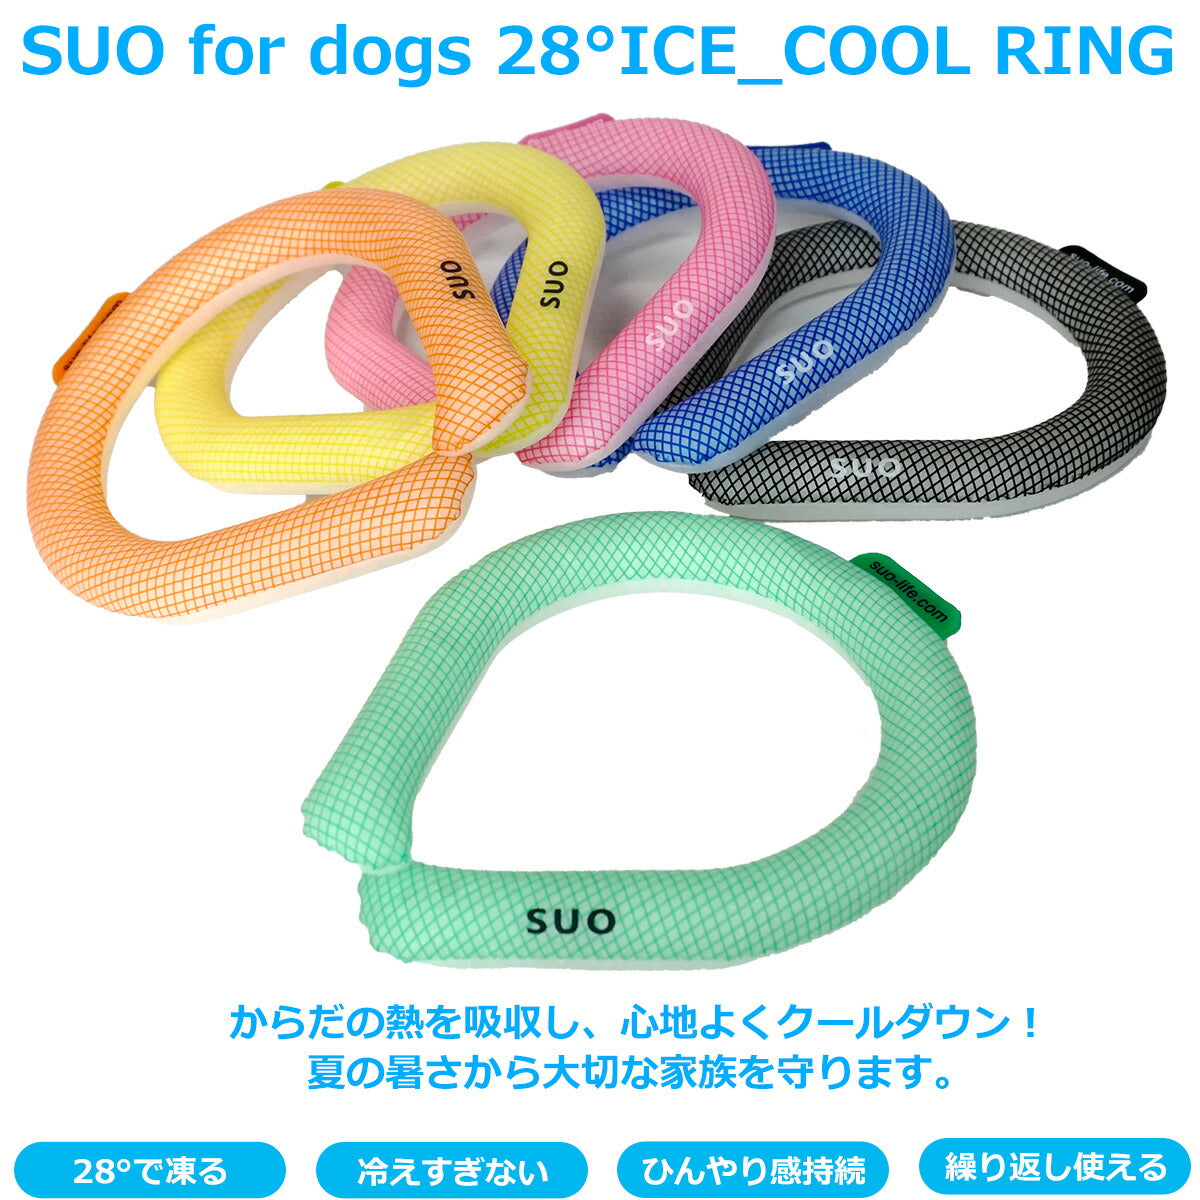 SUO for dogs 28°ICE SUOリング ボタンなし S ブルー 熱中症対策グッズ 暑さ対策 ひんやり 首 冷感 犬 大人 子供